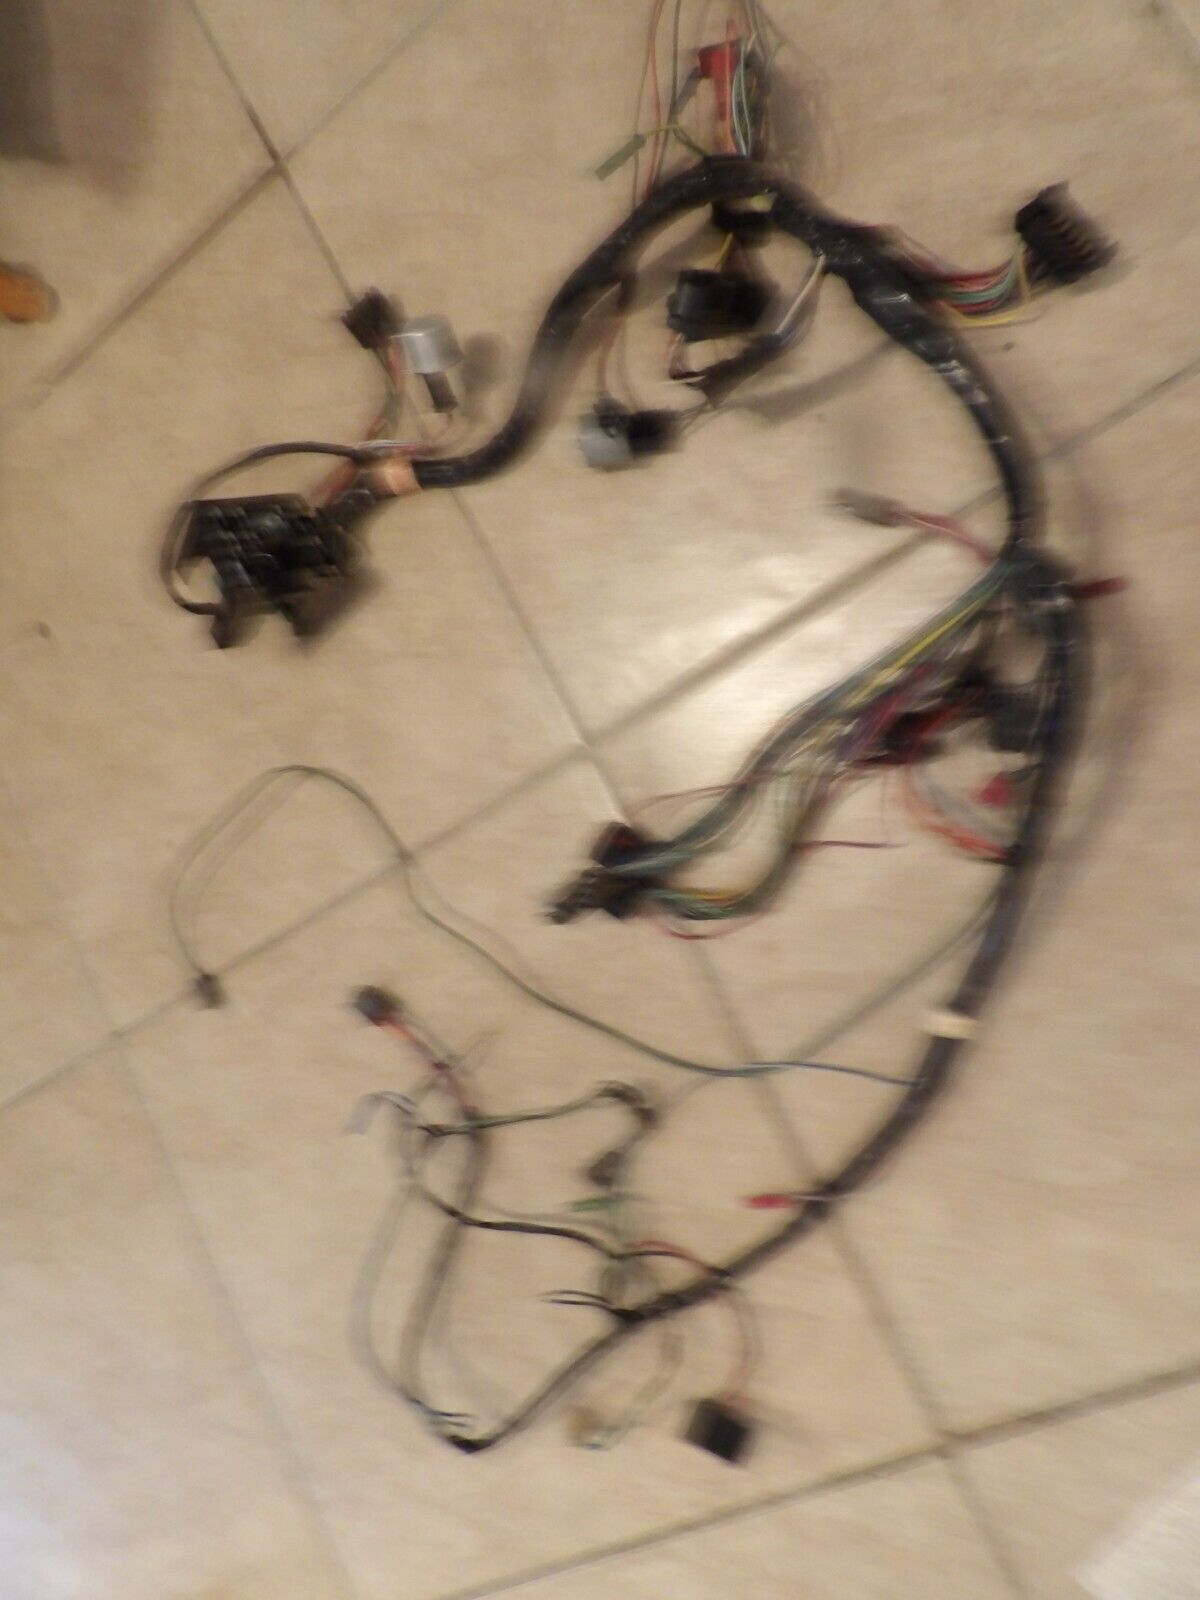 1971 FORD TORINO RANCHERO COBRA UNDER THE DASH WIRING HARNESS WITH A/C VERY NICE